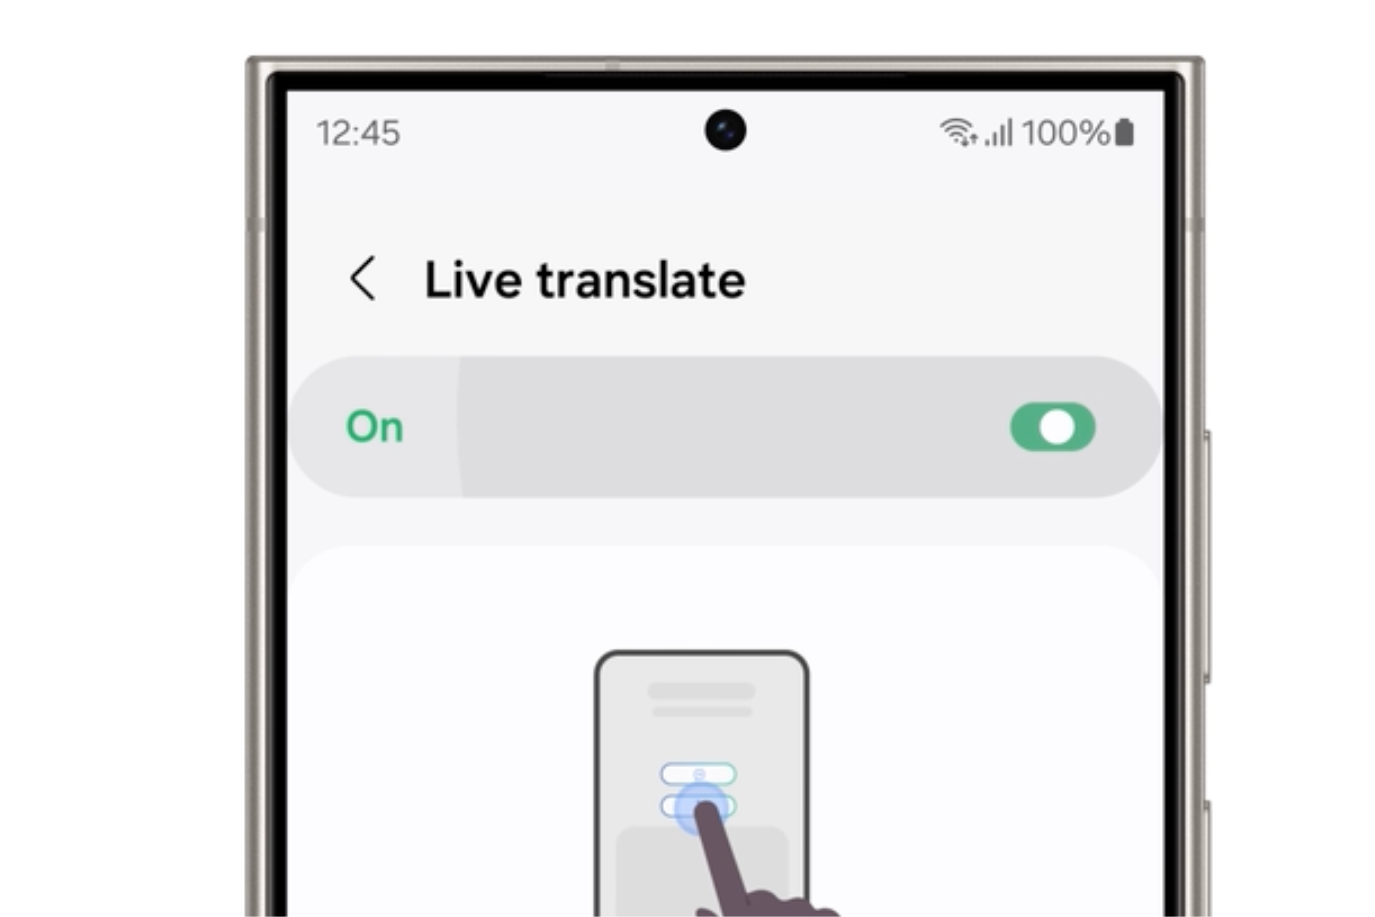 Samsung Live translate feature in action (Image Credit–Samsung) - Will AI-fueled smartphones take over? Probably yes, so let’s see what they can do for you